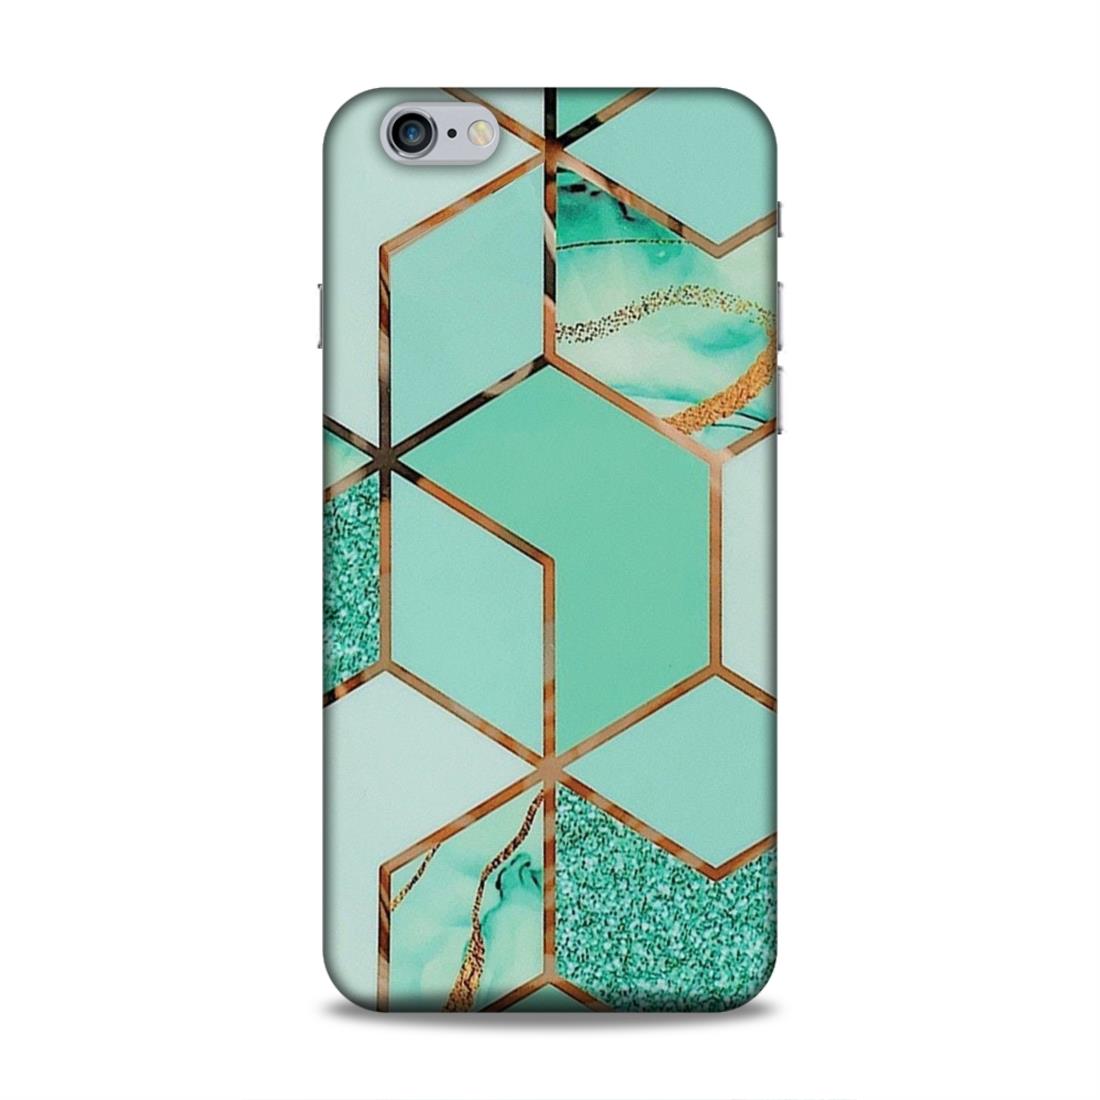 Hexagonal Marble Pattern Hard Back Case For Apple iPhone 6 Plus / 6s Plus